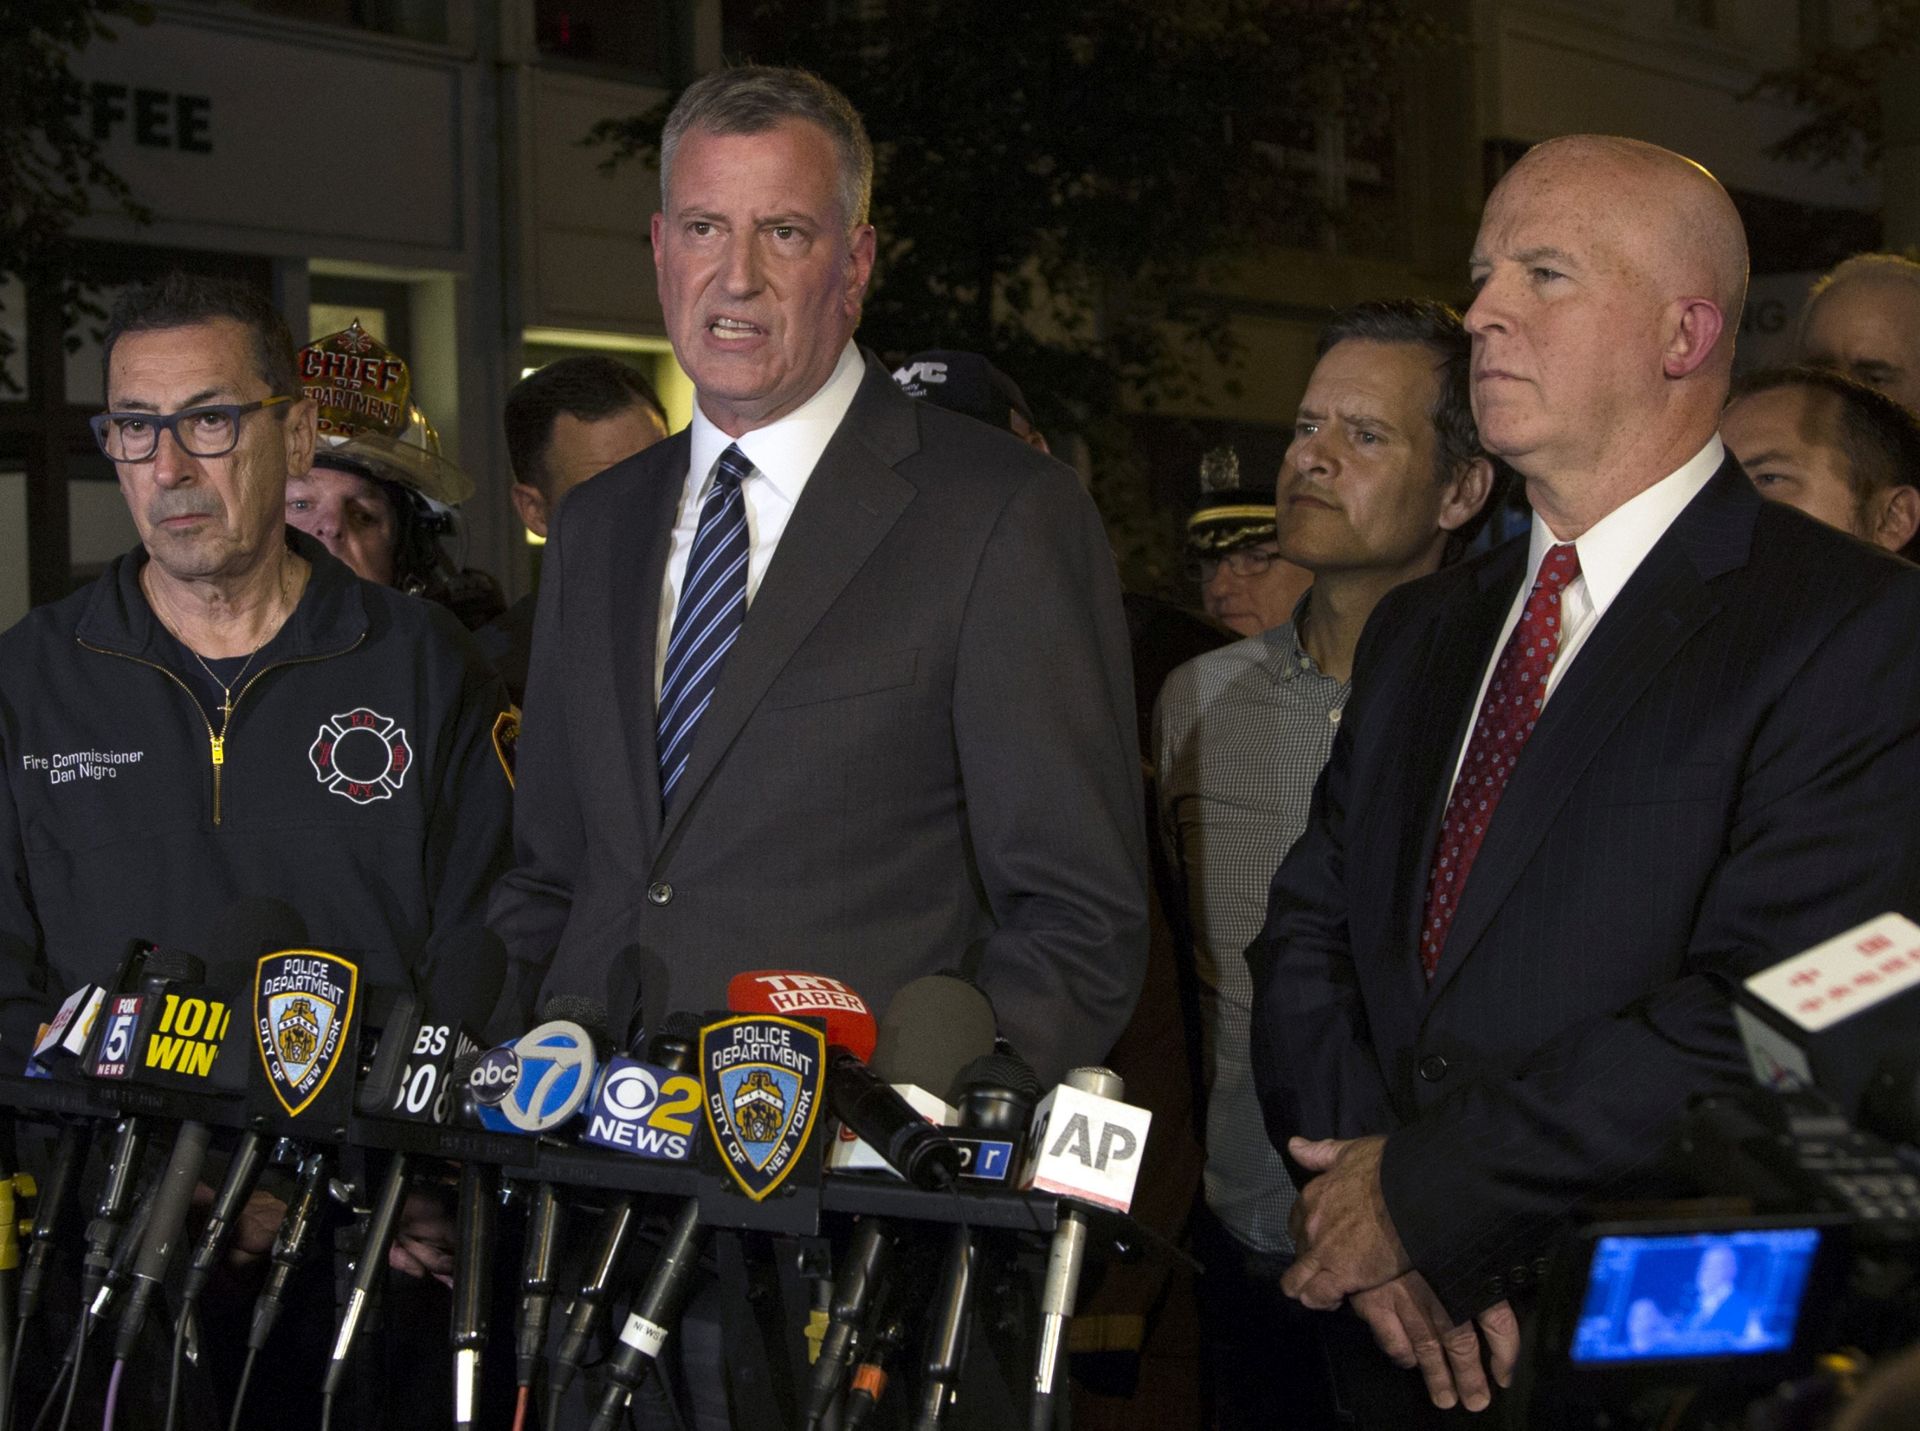 epa05545399 New York City Mayor Bill de Blasio (C) and new New York City Police Commissioner James O'Neill (R) address the media on the scene where an explosion on 23rd Street between 6th and 7th Avenue occurred in the borough of Manhattan in New York, USA, 17 September 2016. Others are not identified.  EPA/ALBA VIGARAY